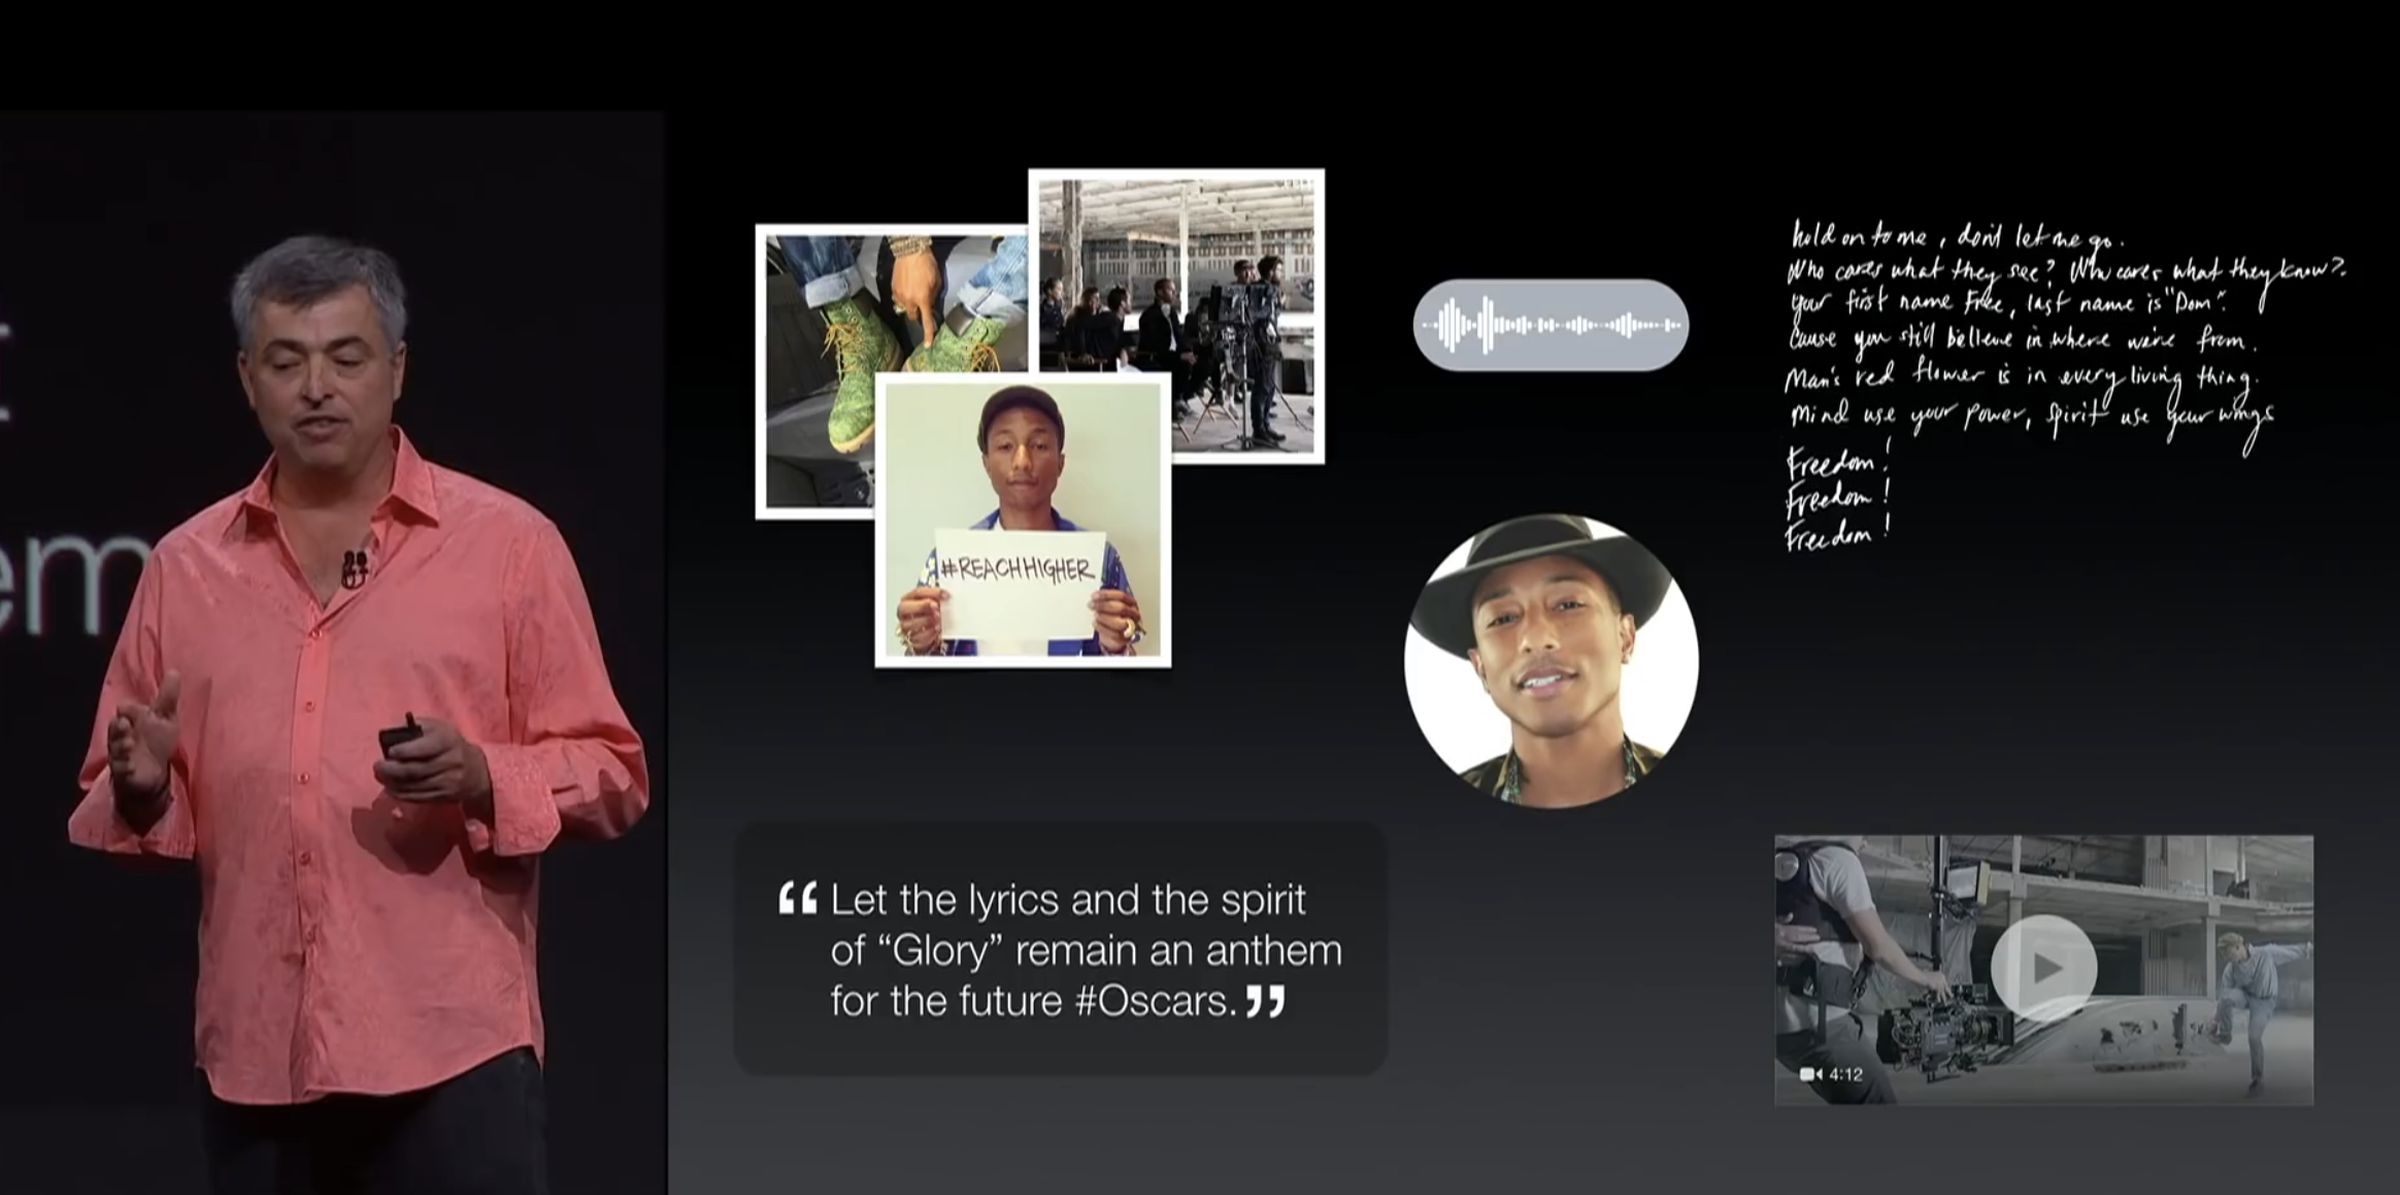 Apple positioned Connect as a unique feature that would allow artists to upload music, videos, photos, lyrics, and other content directly to fans.